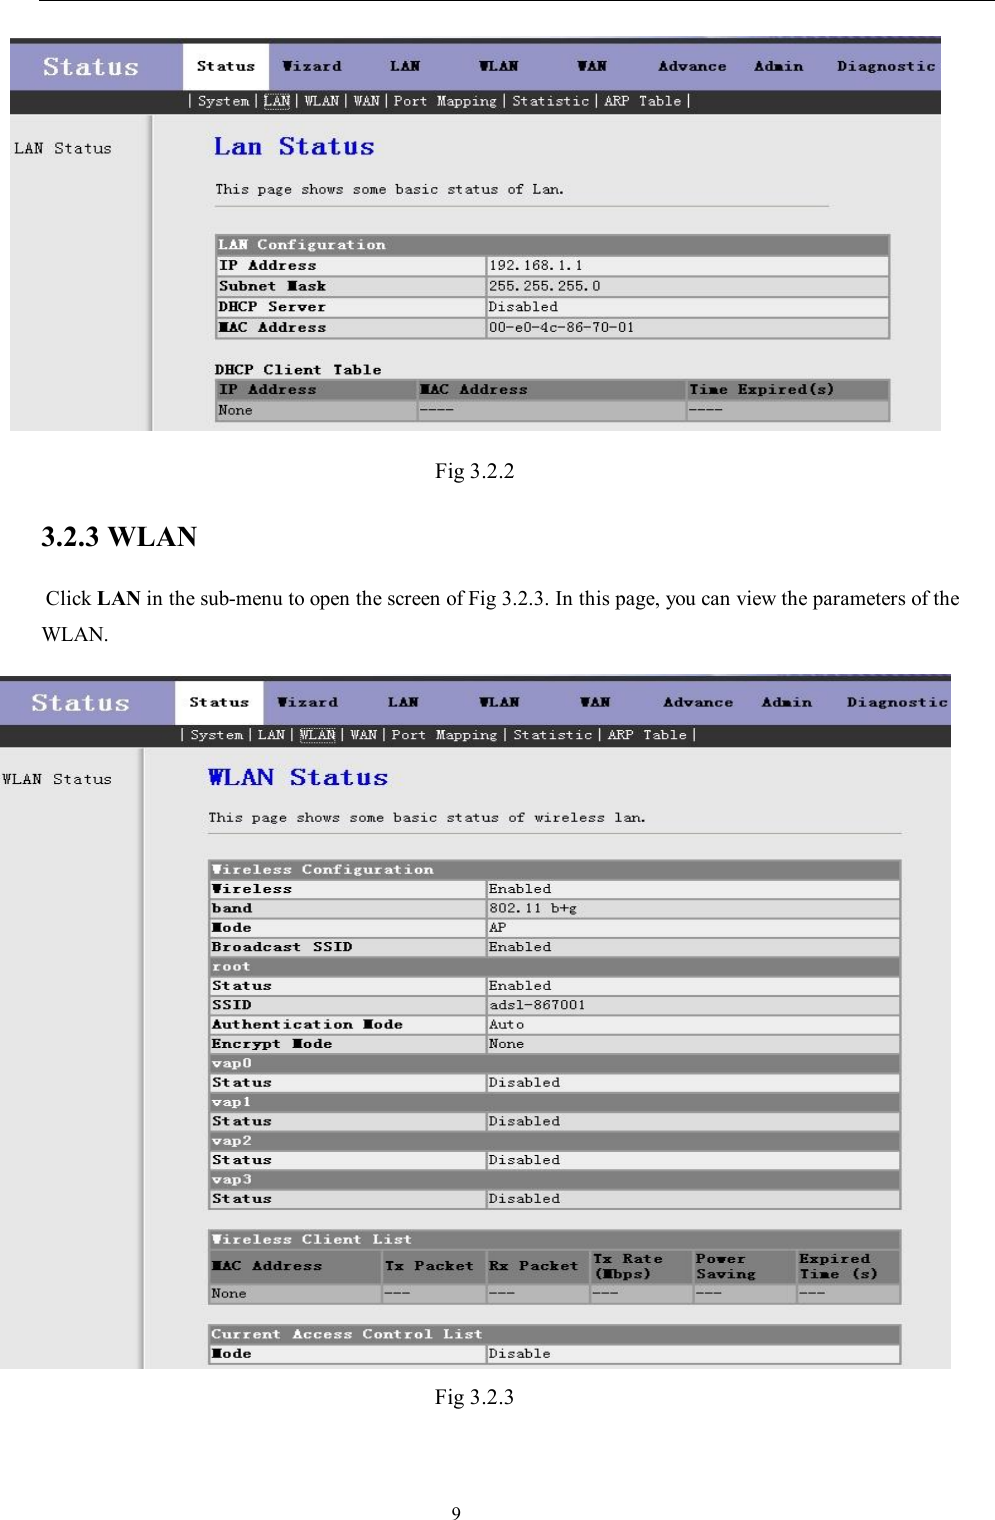                                                                     9  Fig 3.2.2 3.2.3 WLAN  Click LAN in the sub-menu to open the screen of Fig 3.2.3. In this page, you can view the parameters of the WLAN.  Fig 3.2.3 